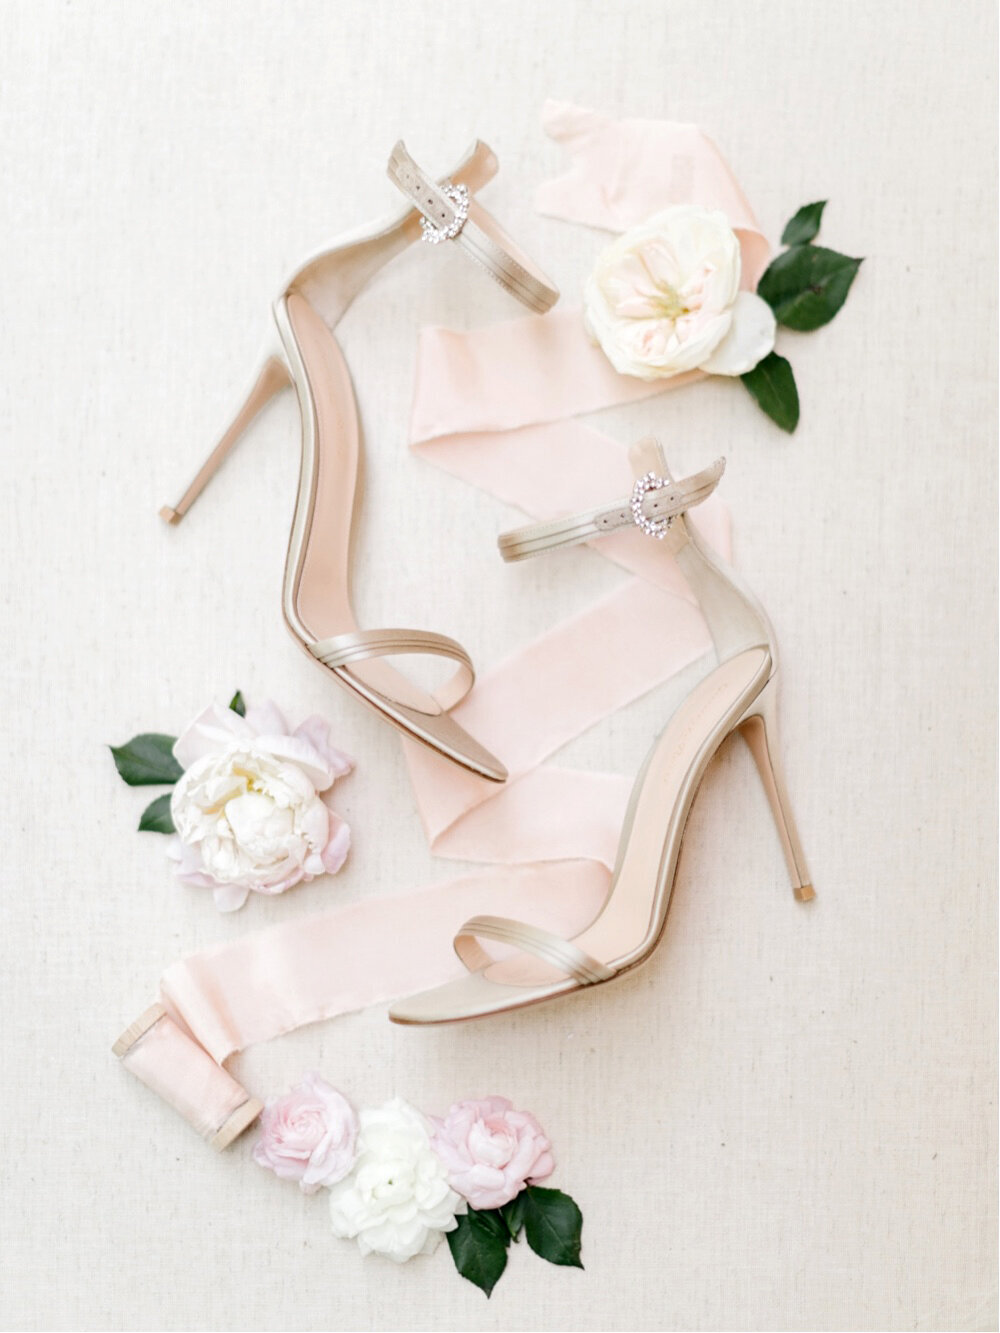 027_wedding-shoes-and-details_wedding-shoes